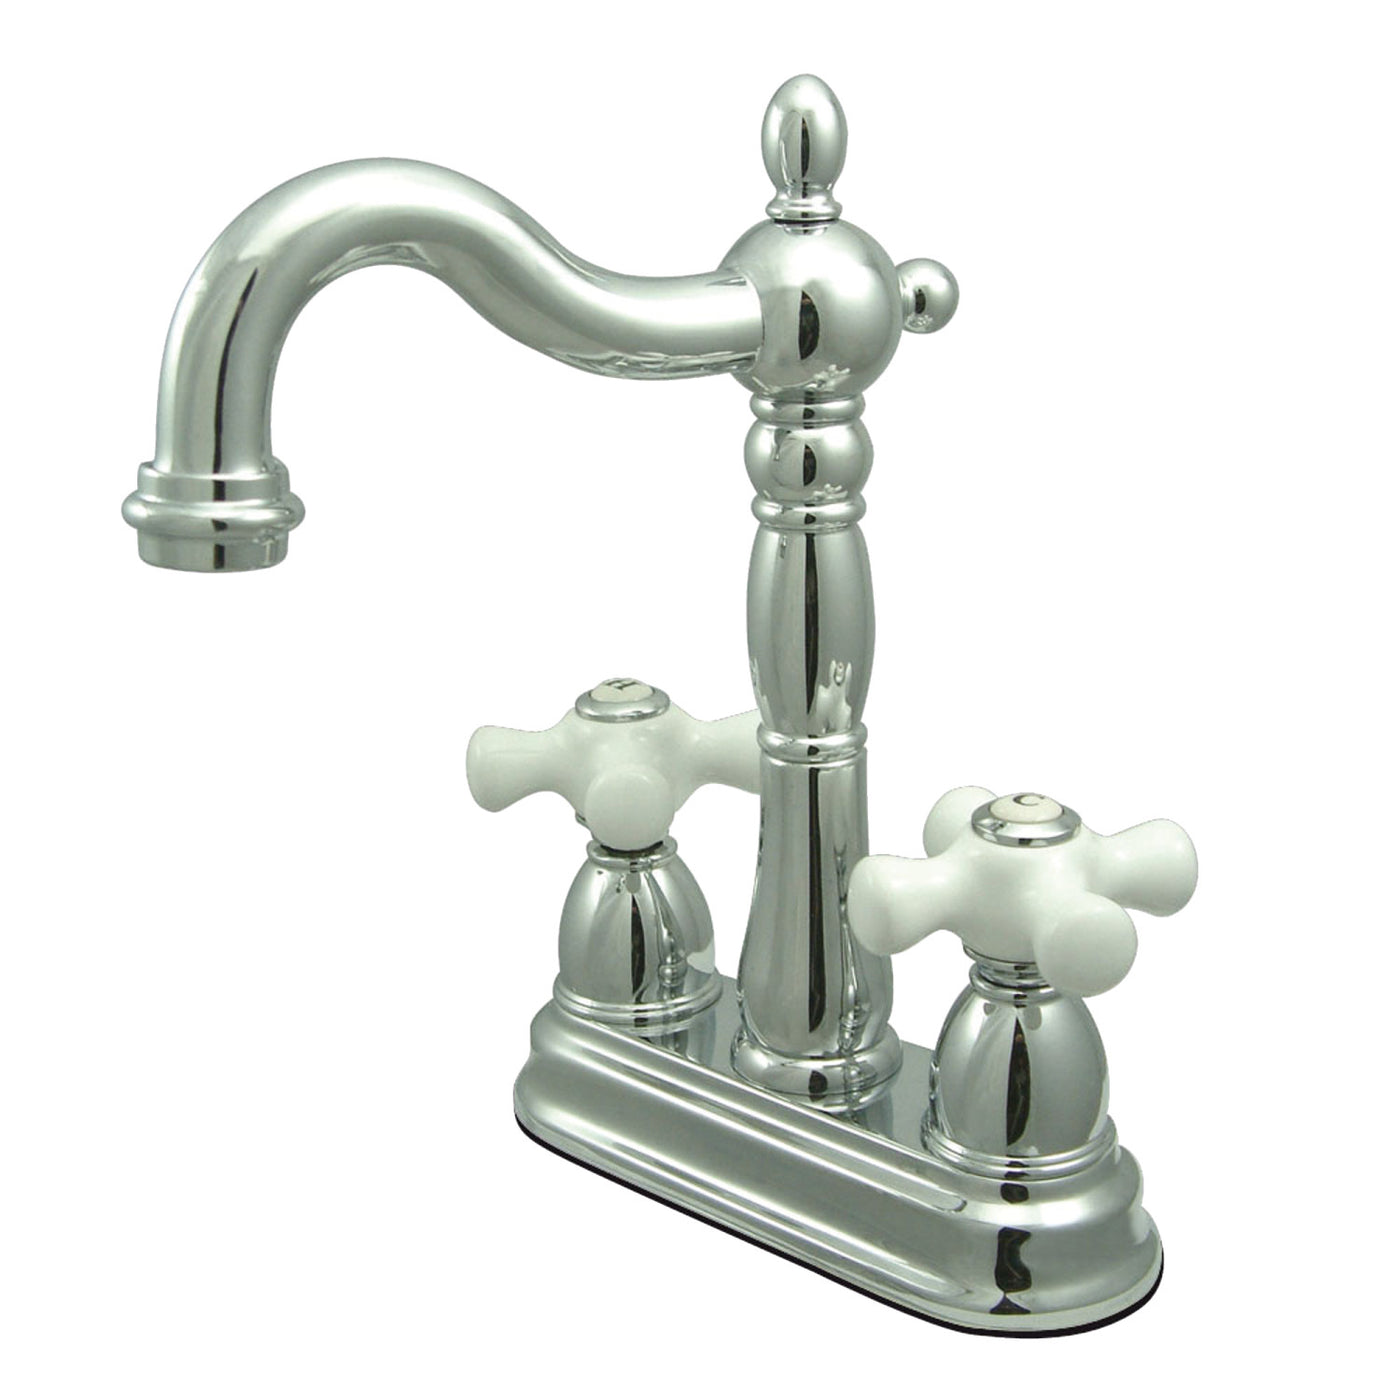 Elements of Design EB1491PX 4-Inch Centerset Bar Faucet, Polished Chrome